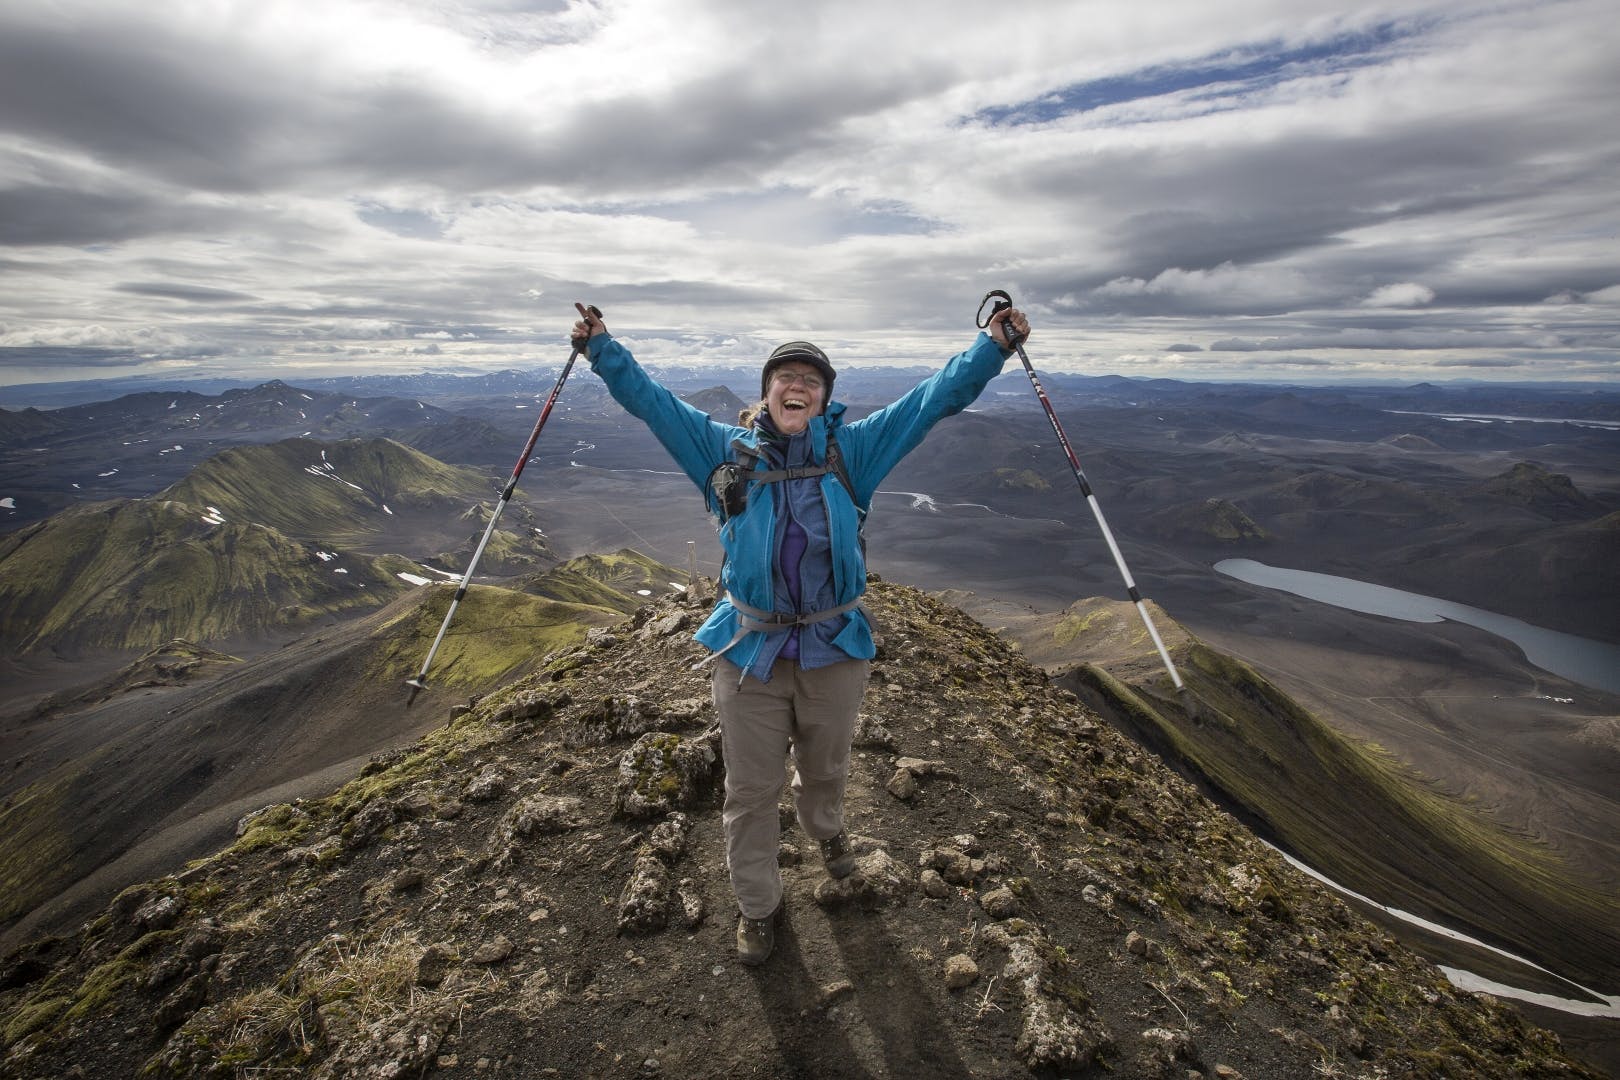 Hiking through the Highlands of Iceland is a once in a lifetime experience and the perfect outdoor adventure.